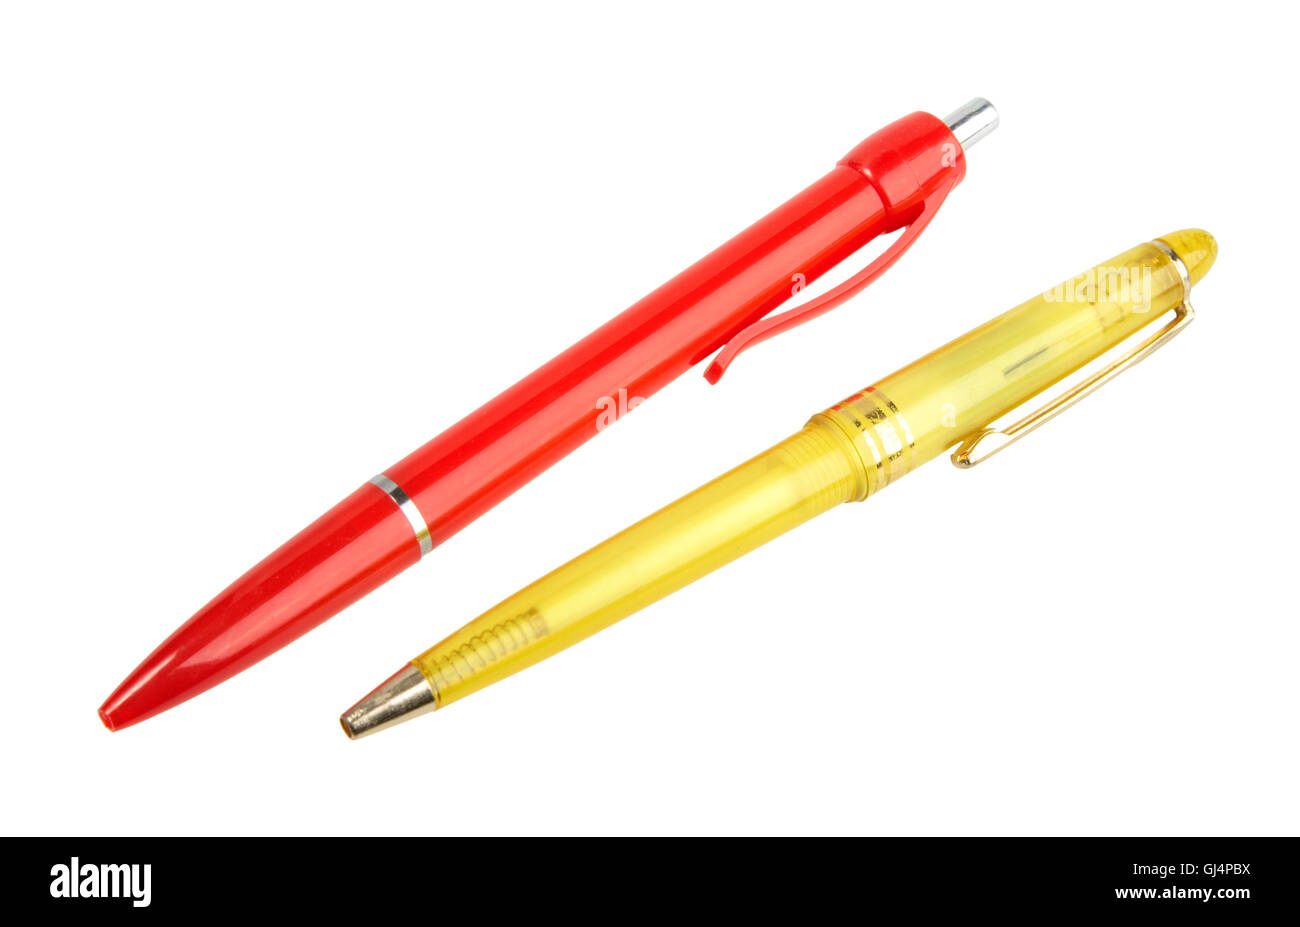 Yellow and red ball point pens. Stock Photo